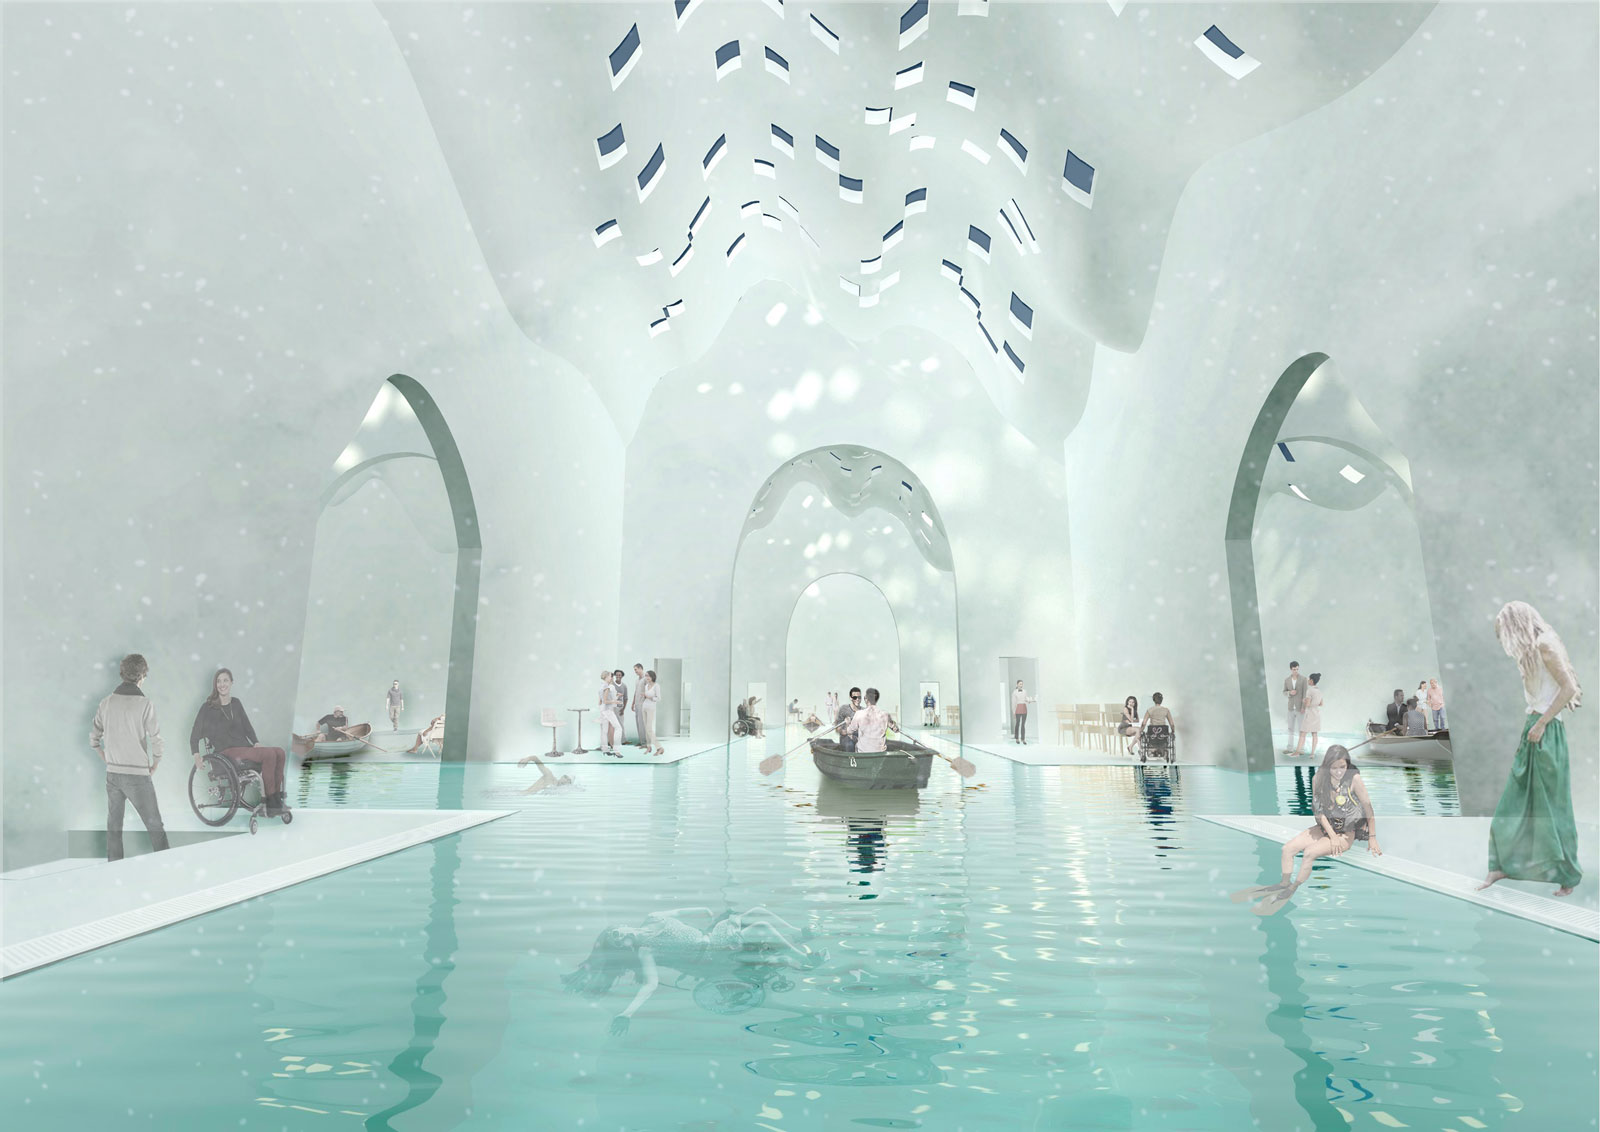 Visualisation of the Venecian river crossing in the Aquatic Foyer